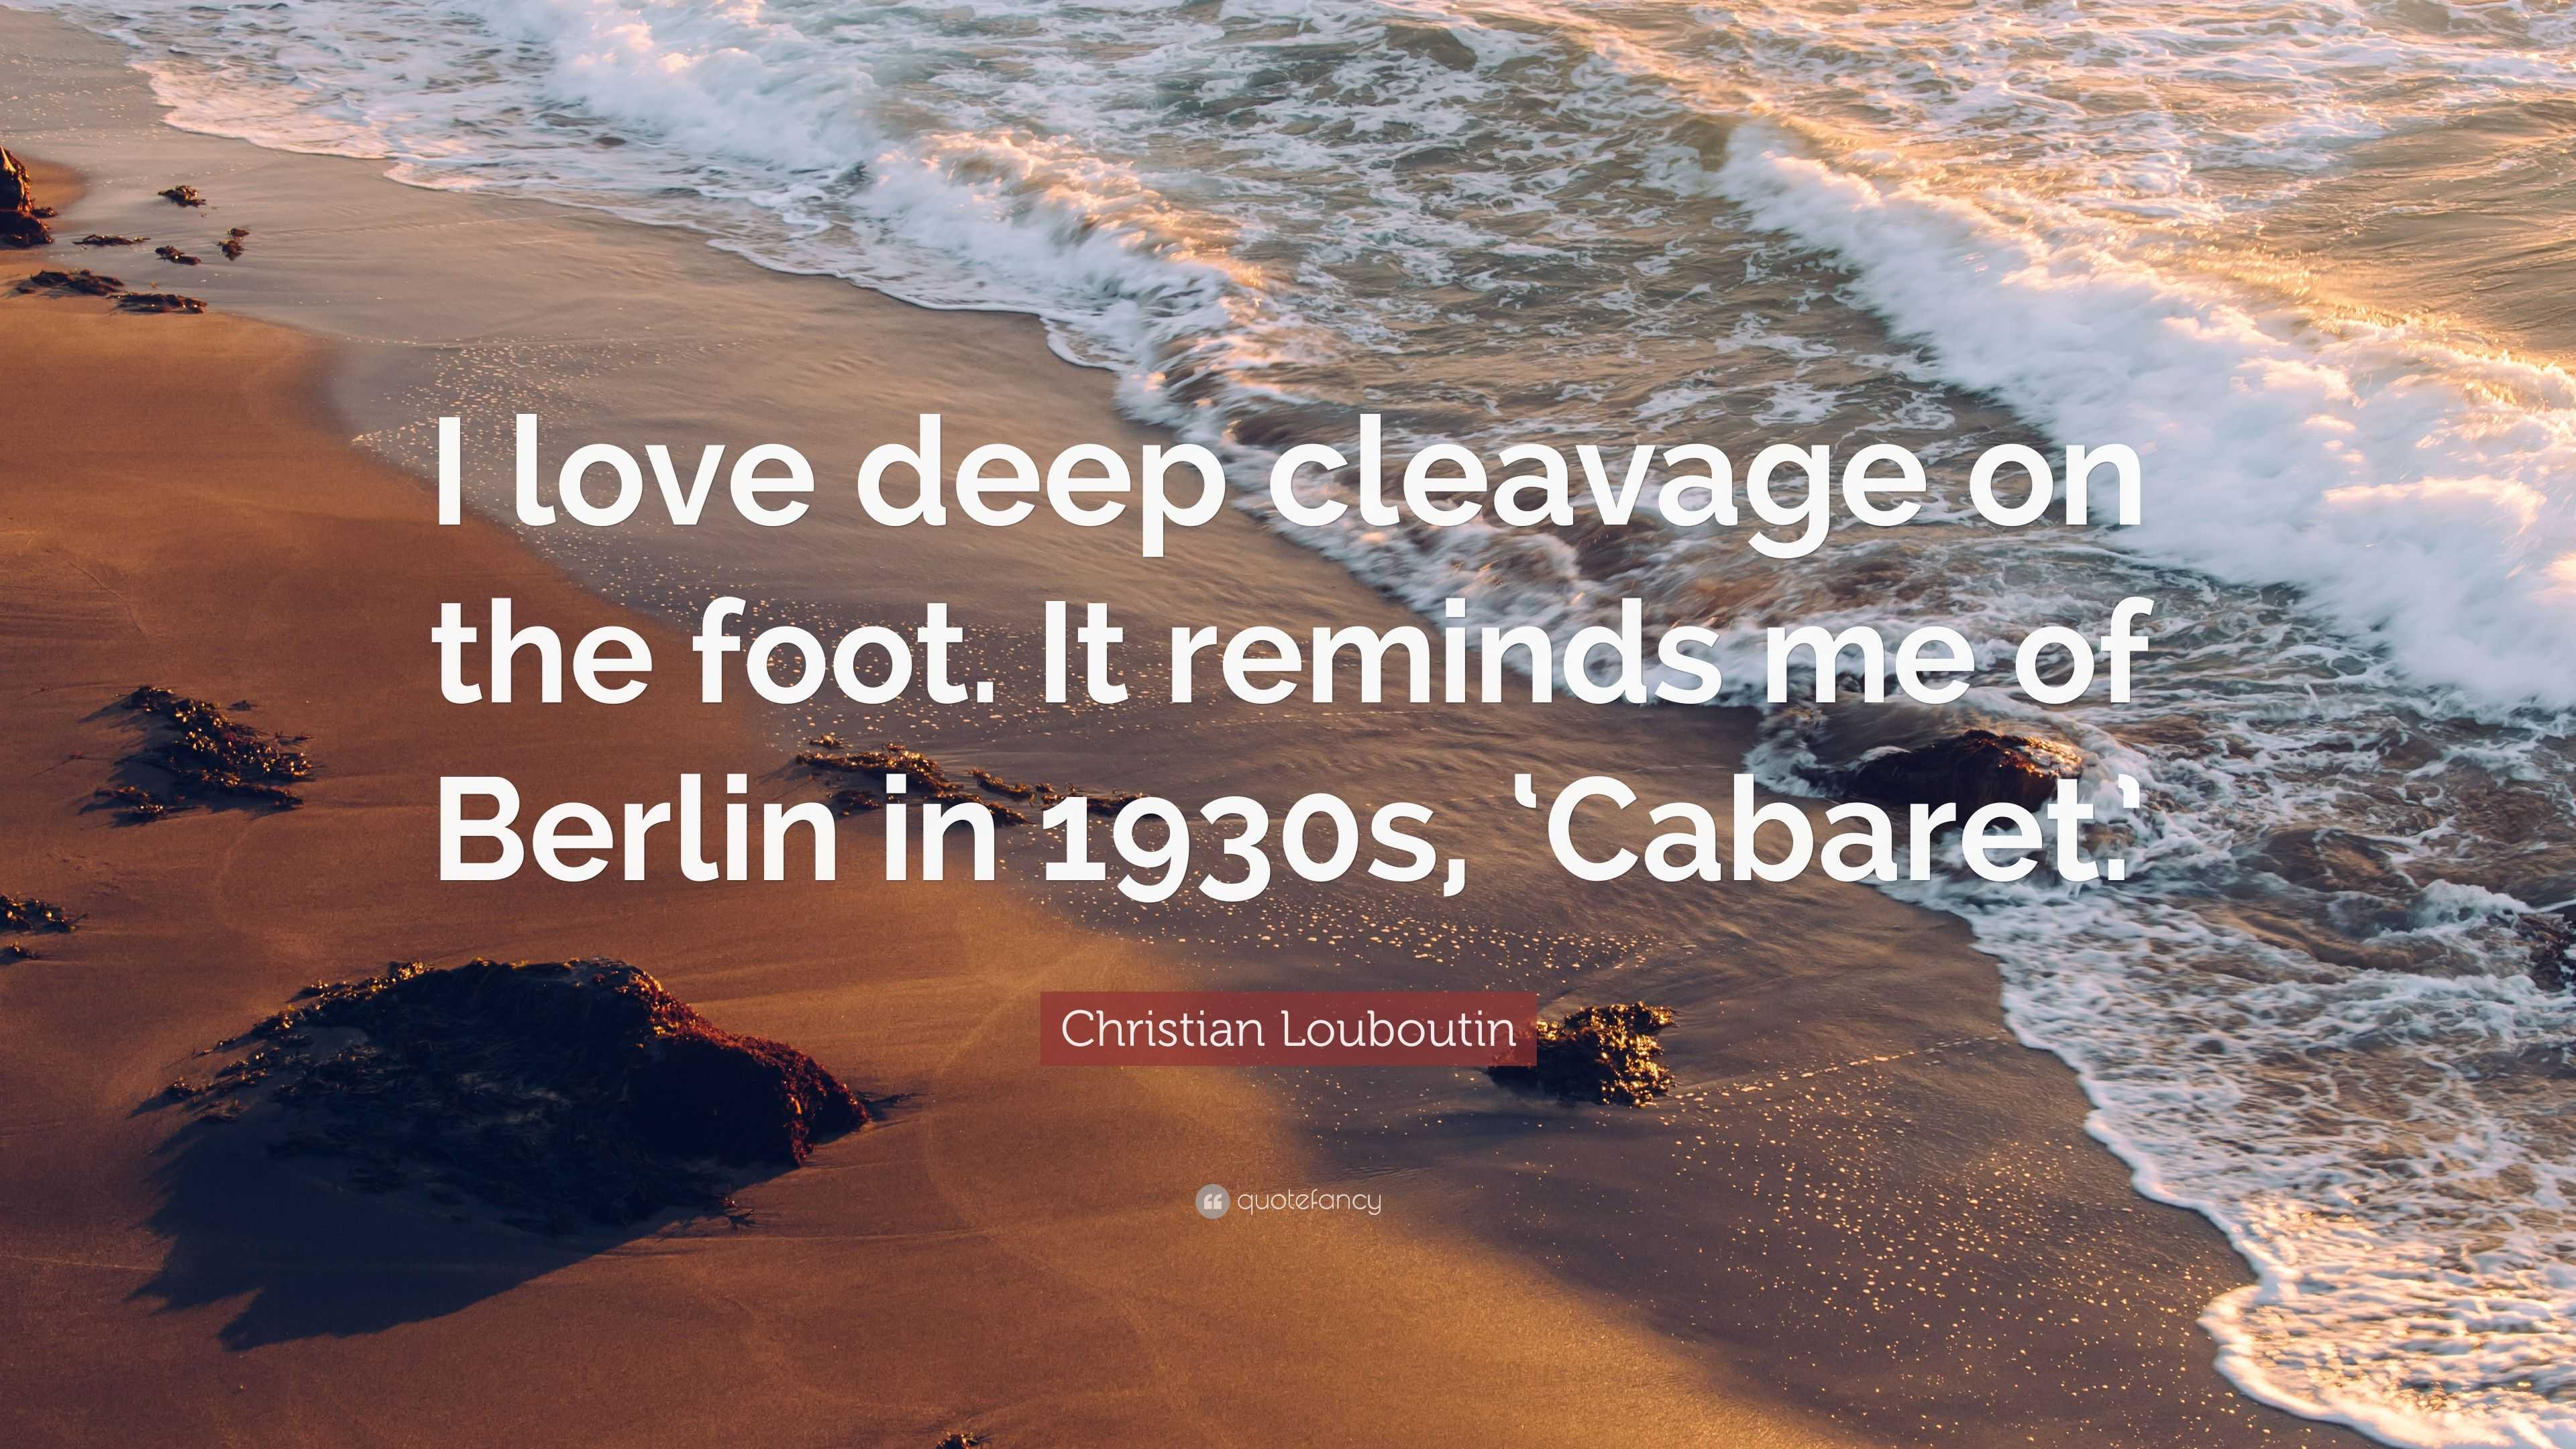 Christian Louboutin Quote: “I love deep cleavage on the foot. It